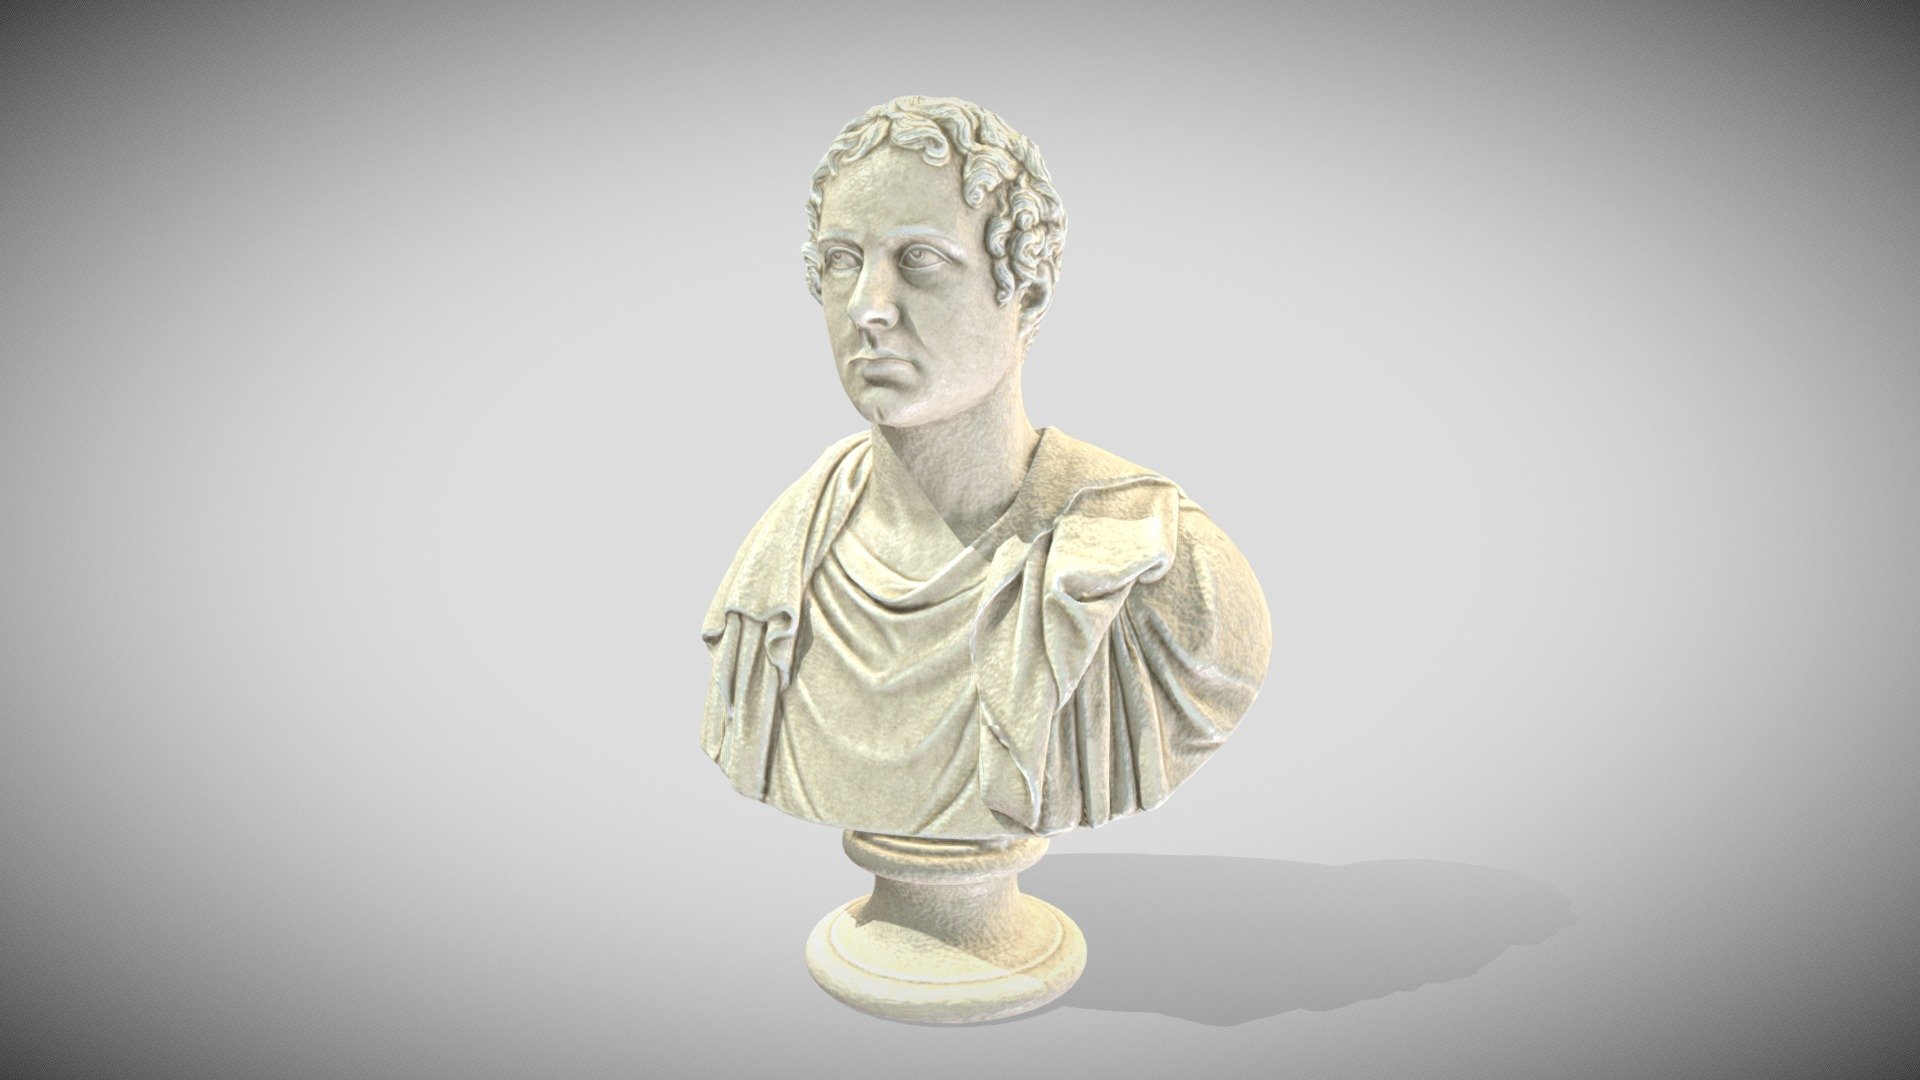 Original very nice 3D Scan from the Thorvaldsens Museum

https://www.thorvaldsensmuseum.dk/en/collections/work/A257

here the Painted Gaming Version LR... 3d model